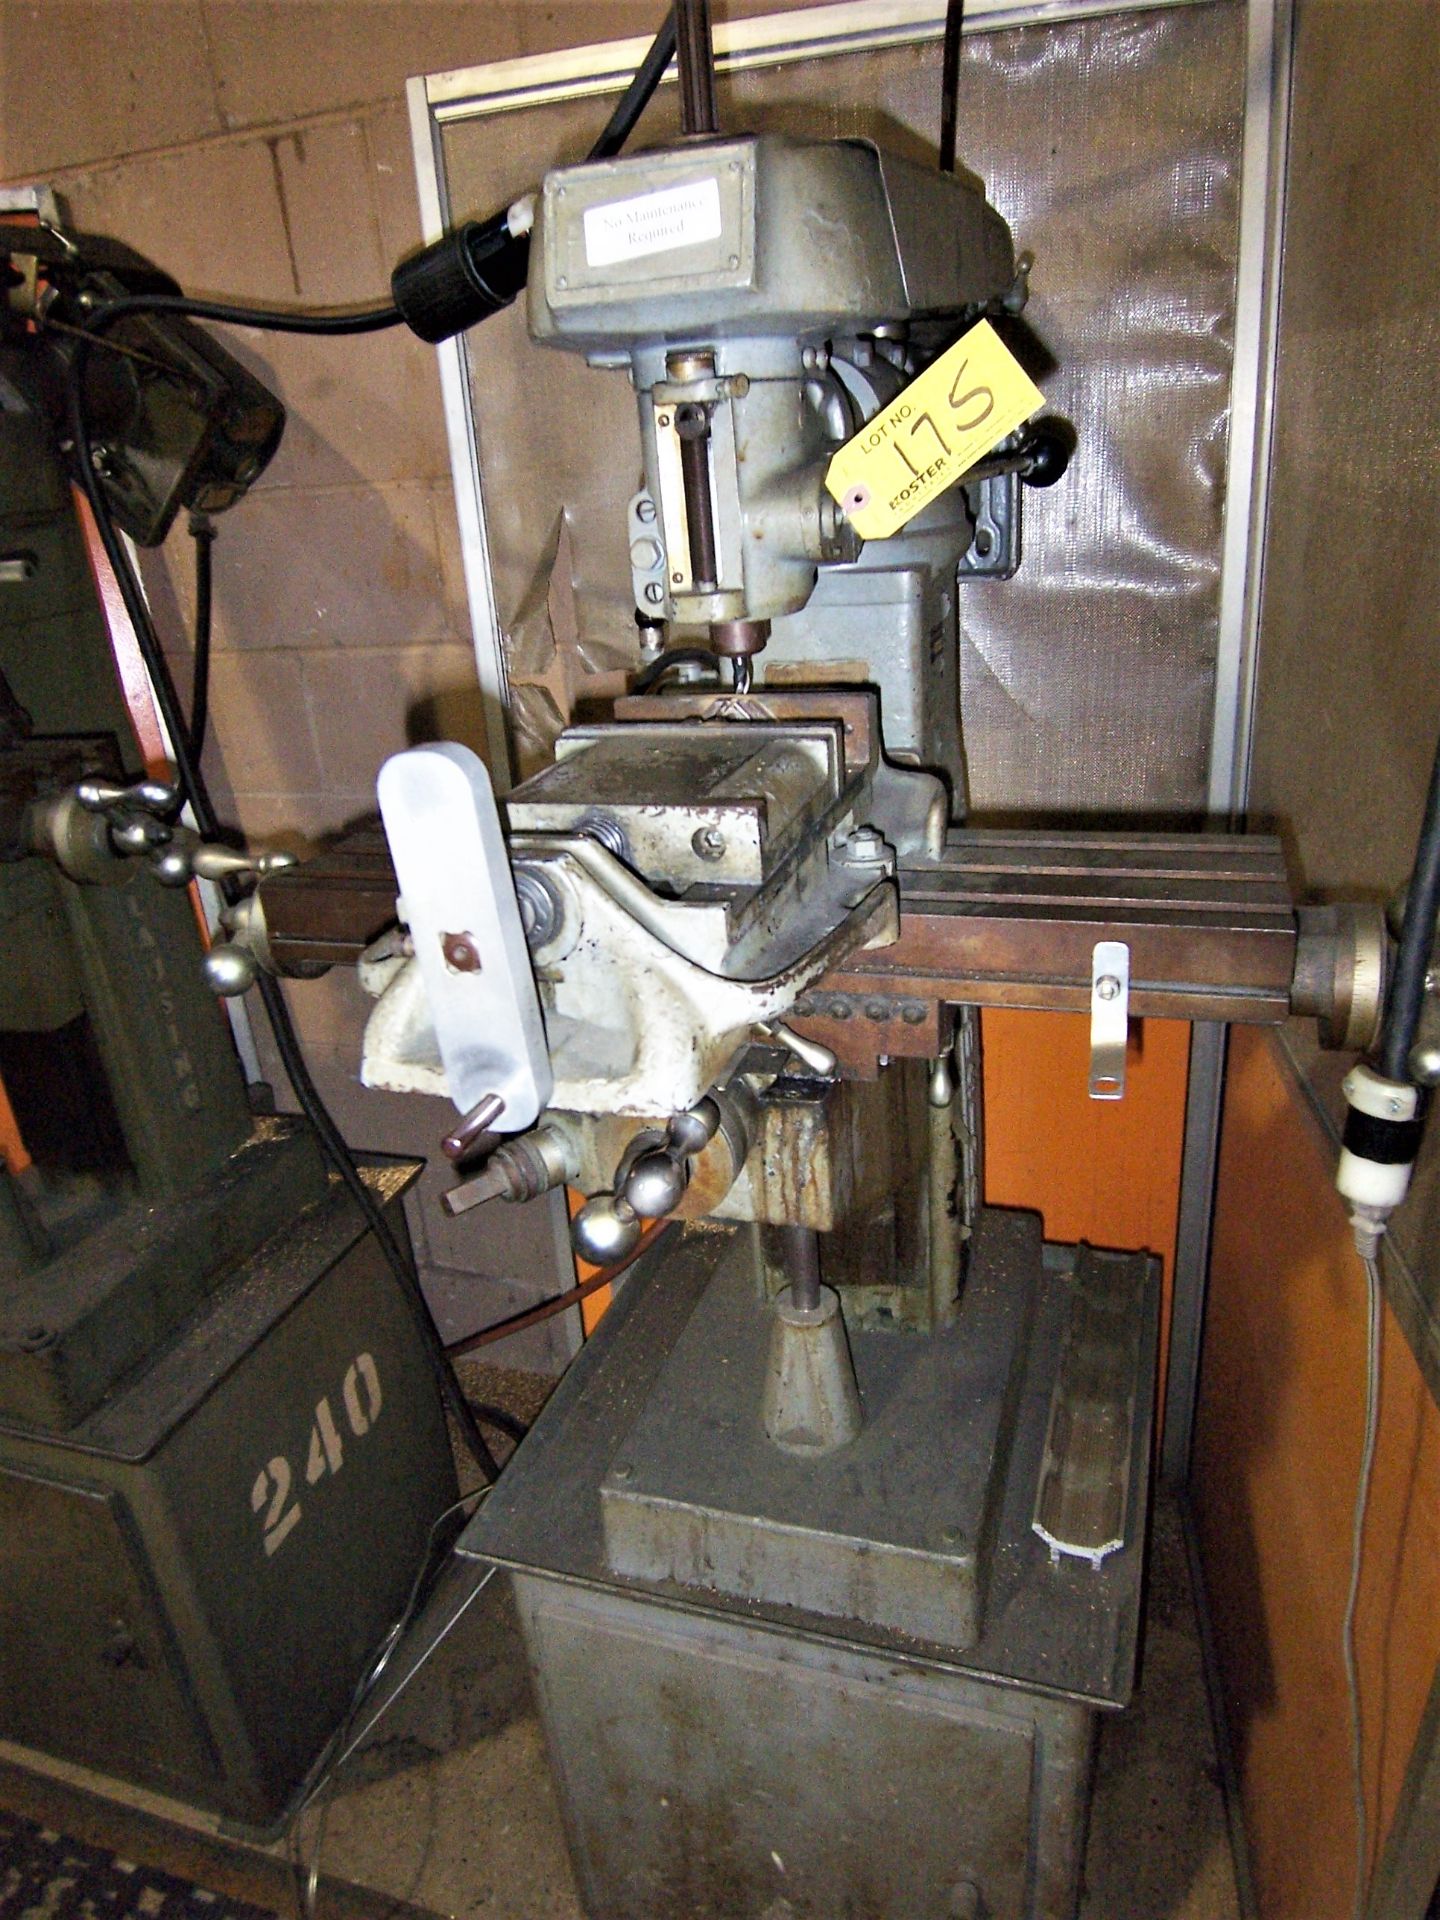 CLAUSING MDL. 8250 VERTICAL KNEE TYPE MILLING MACHINE, WITH STEP PULLEY SPEED CHANGE, #2MT TAPER, 6"